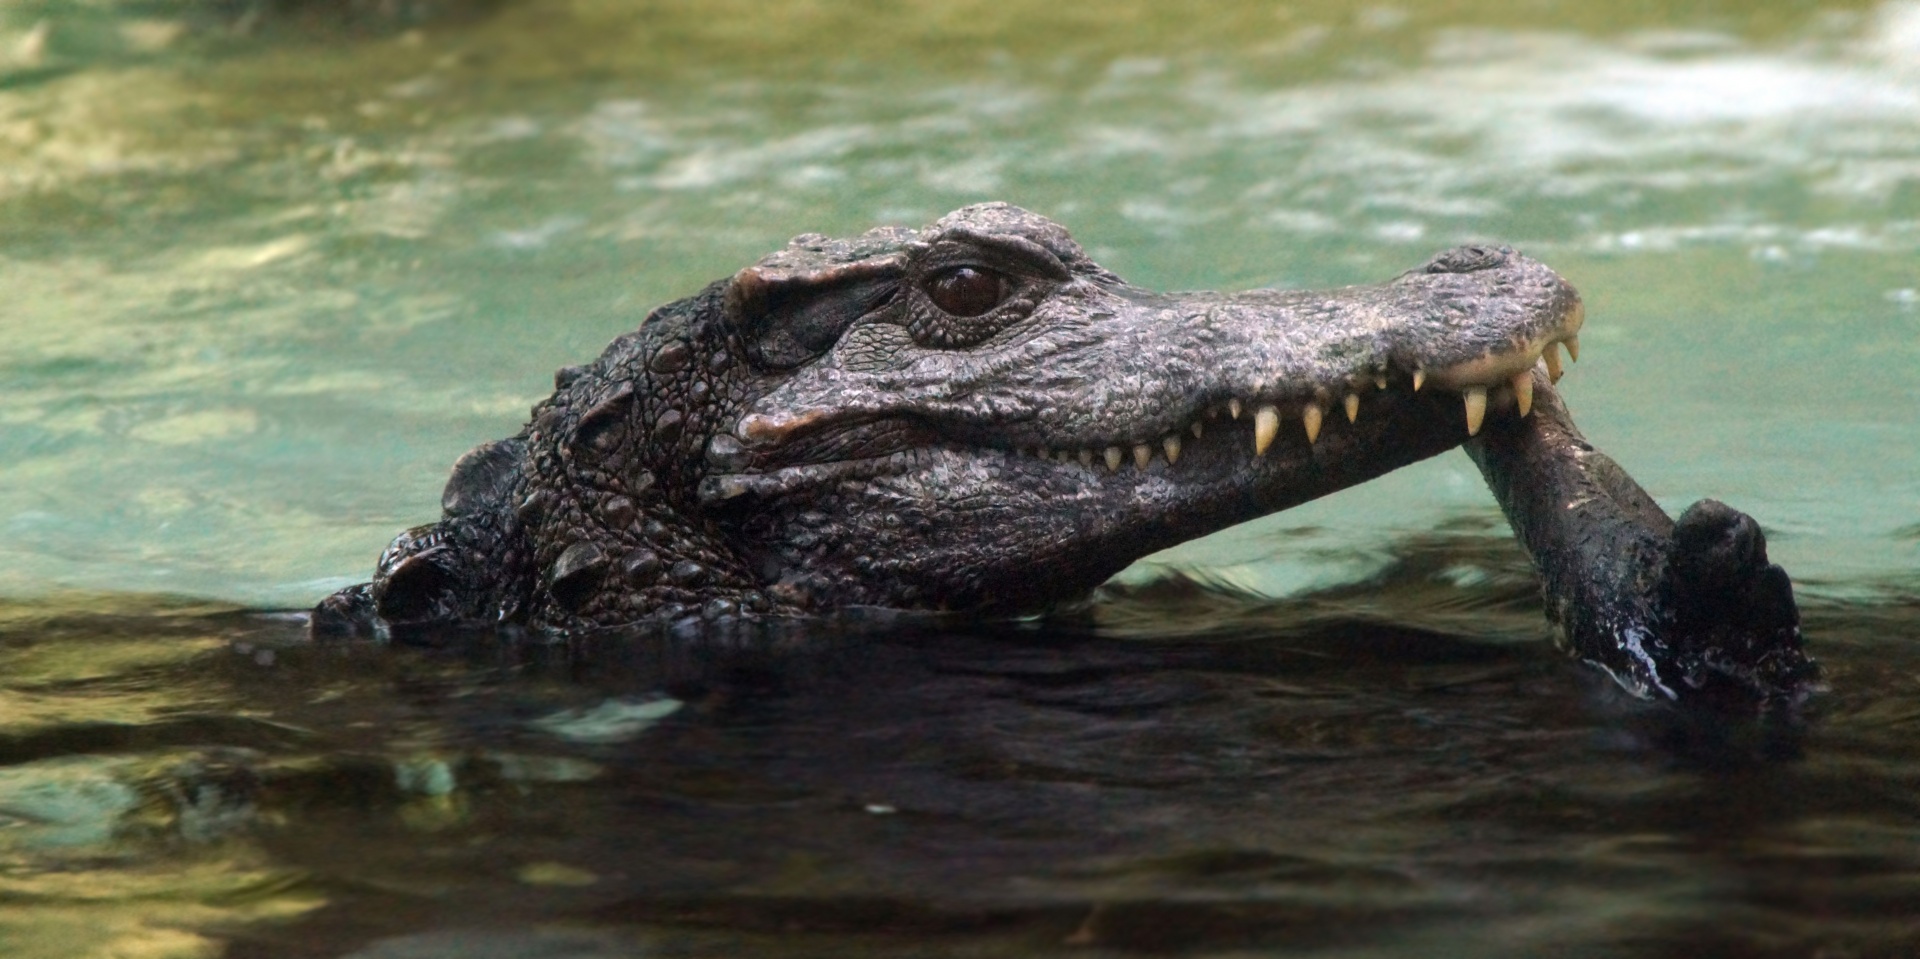 Alligator crocodile reptile water bodies of water photography